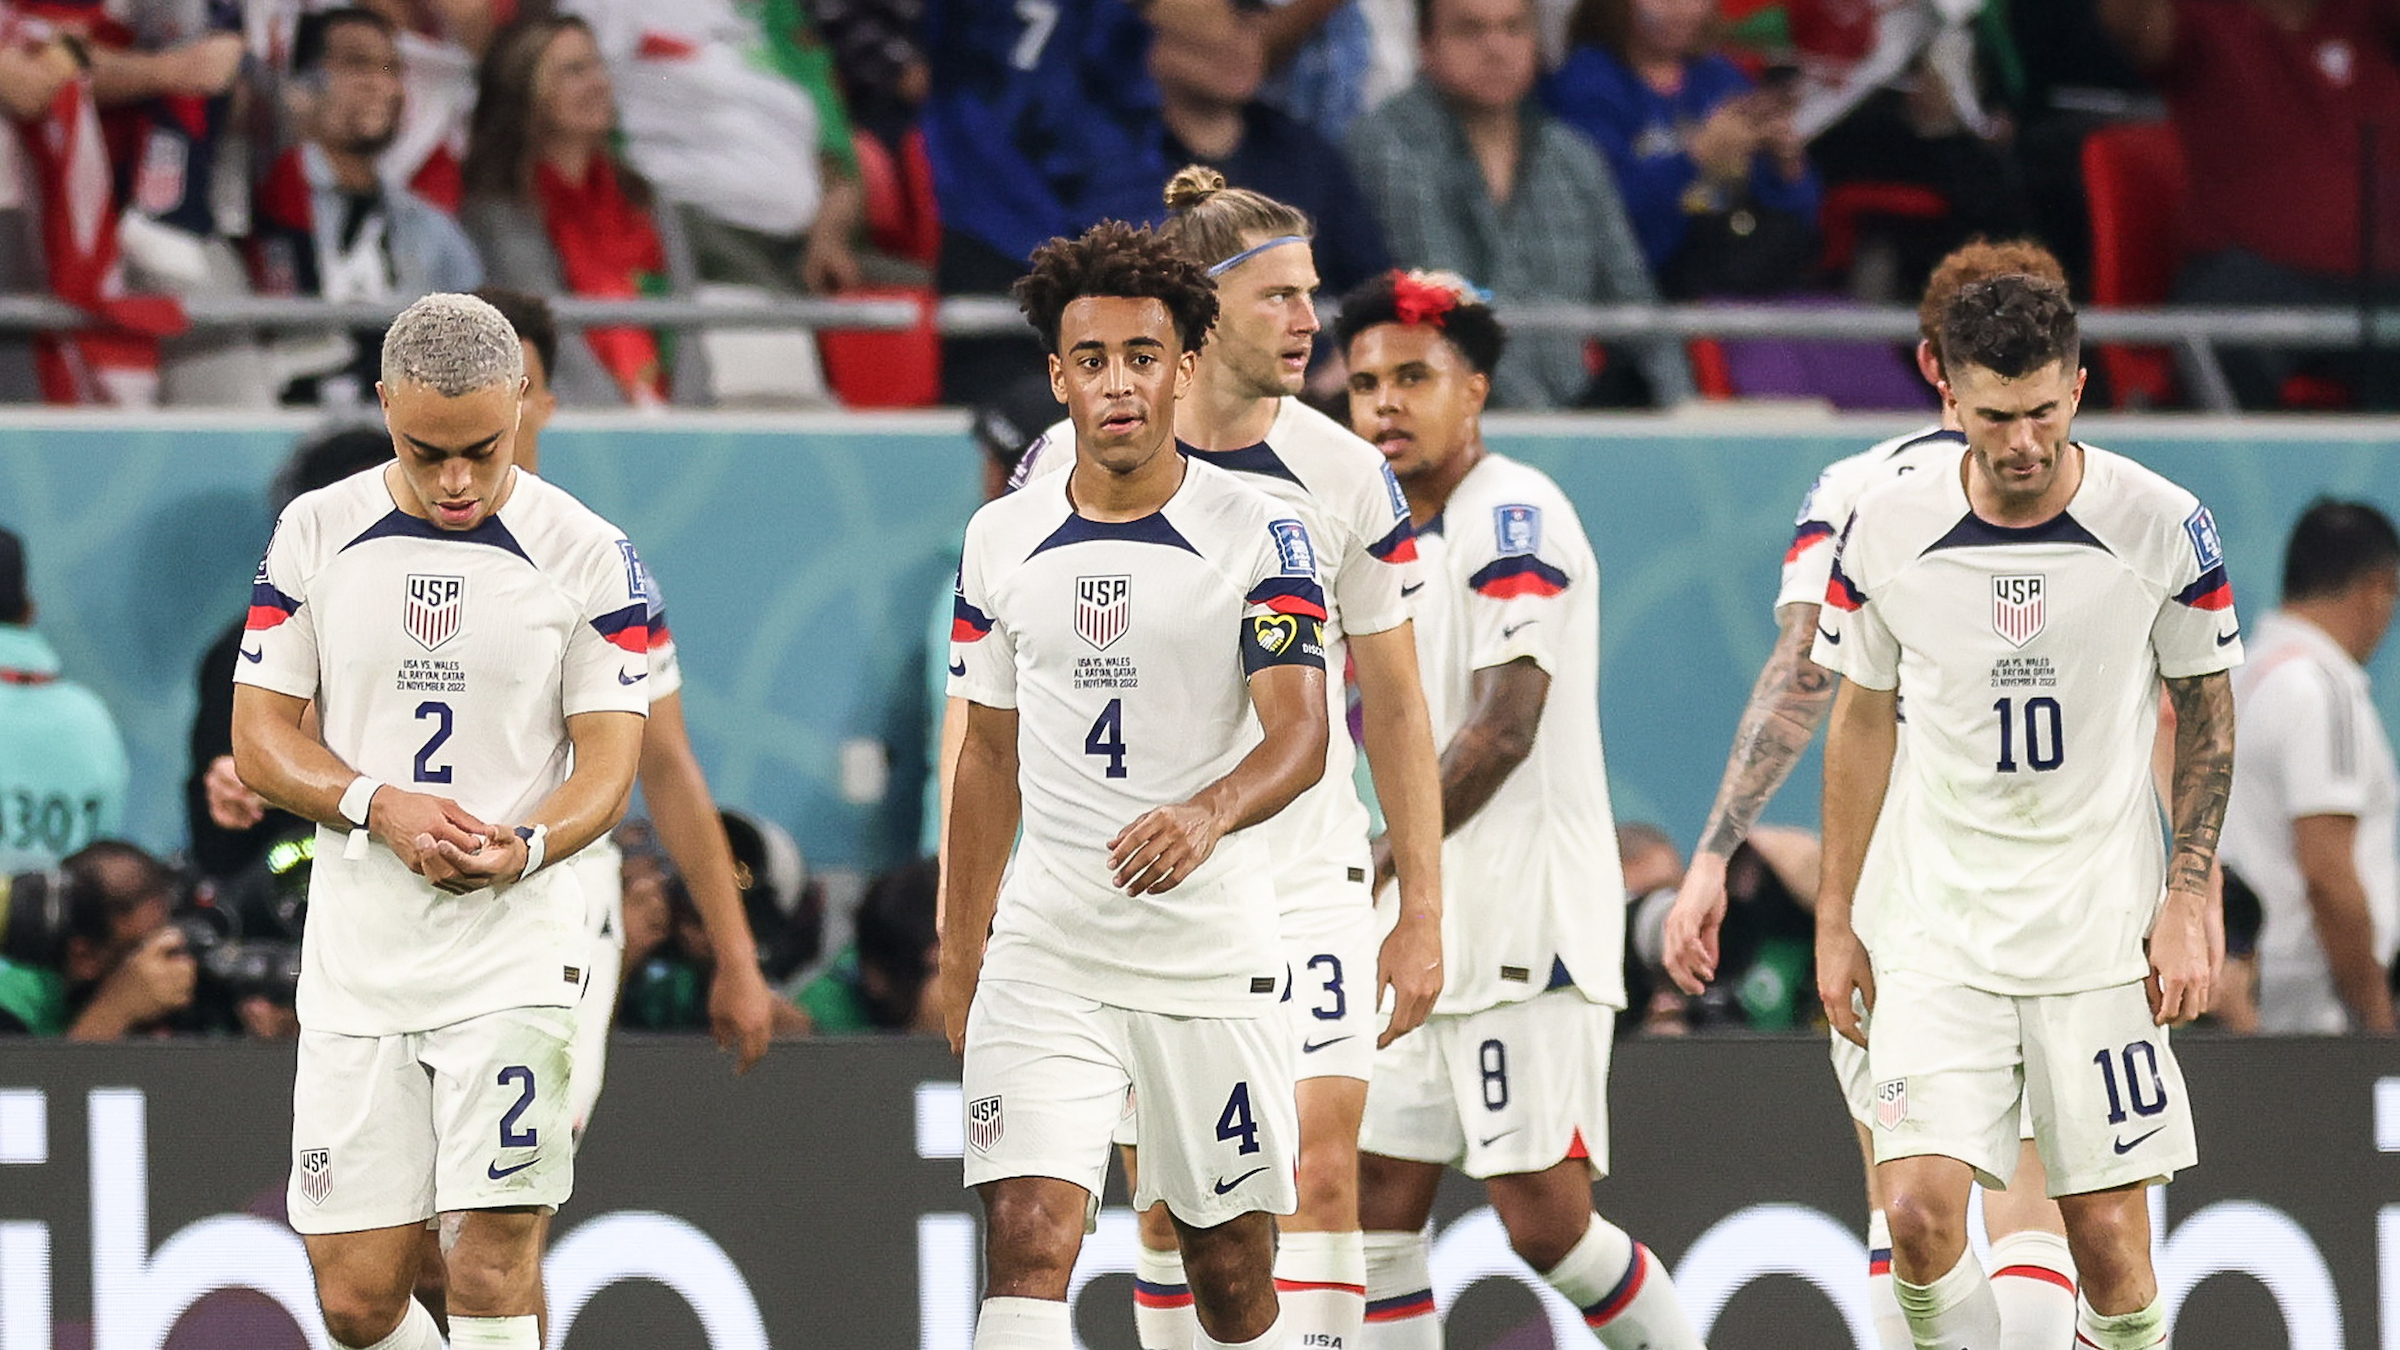 USMNT plays Wales to 1-1 draw in FIFA World Cup opener